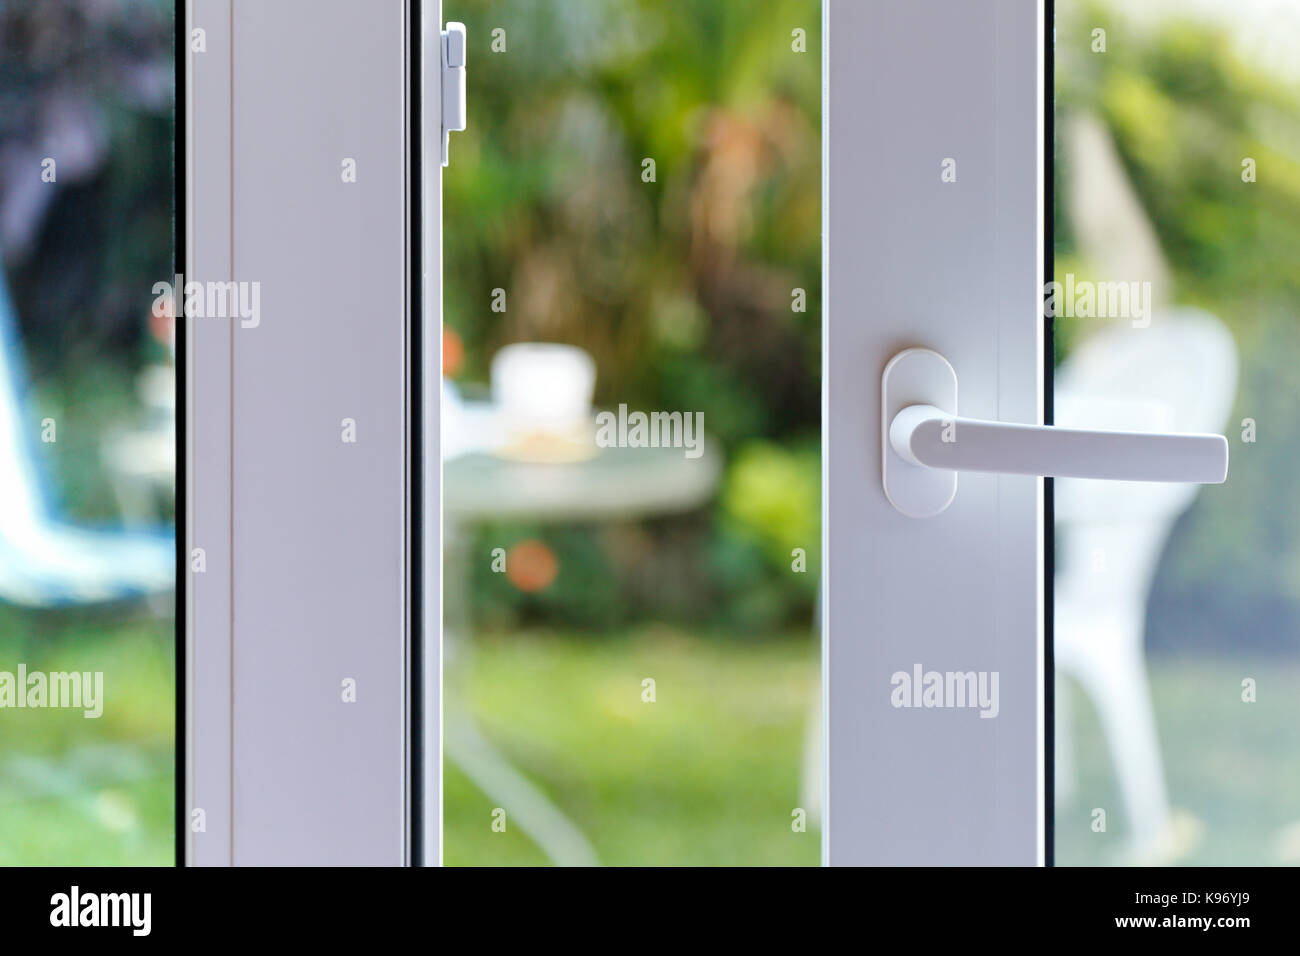 Open door of a family home. Close-up of the lock on the sliding door with the yard of background. White PVC door and double glass. Stock Photo